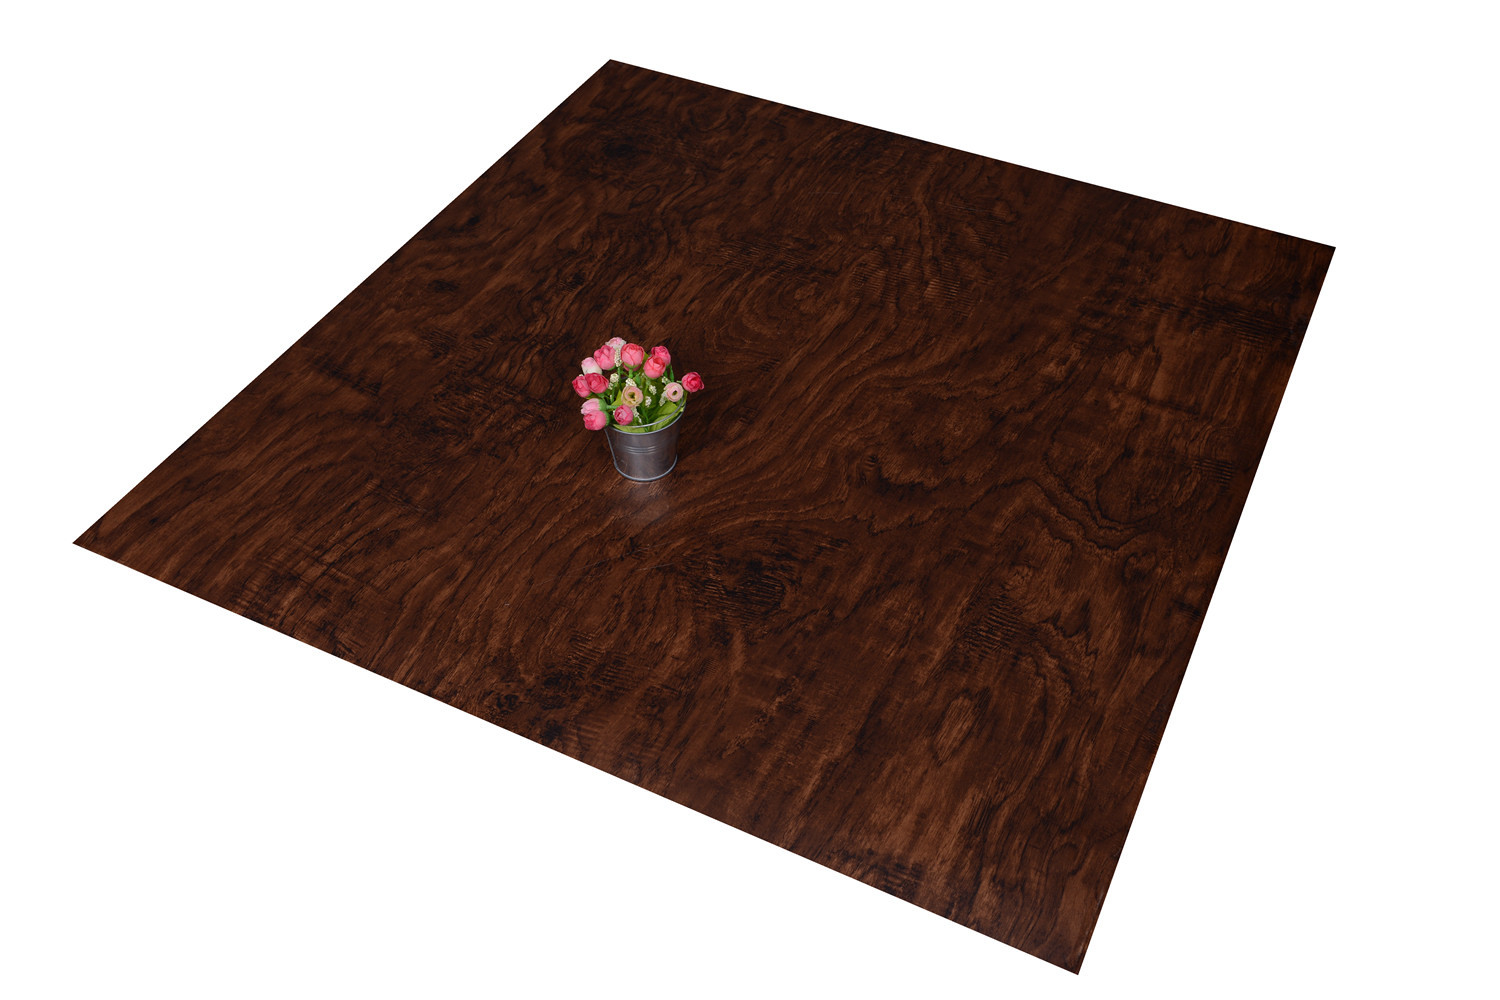  Eco - Friendly Commercial Faux Wood Floor Tile Waterproof For Office Manufactures